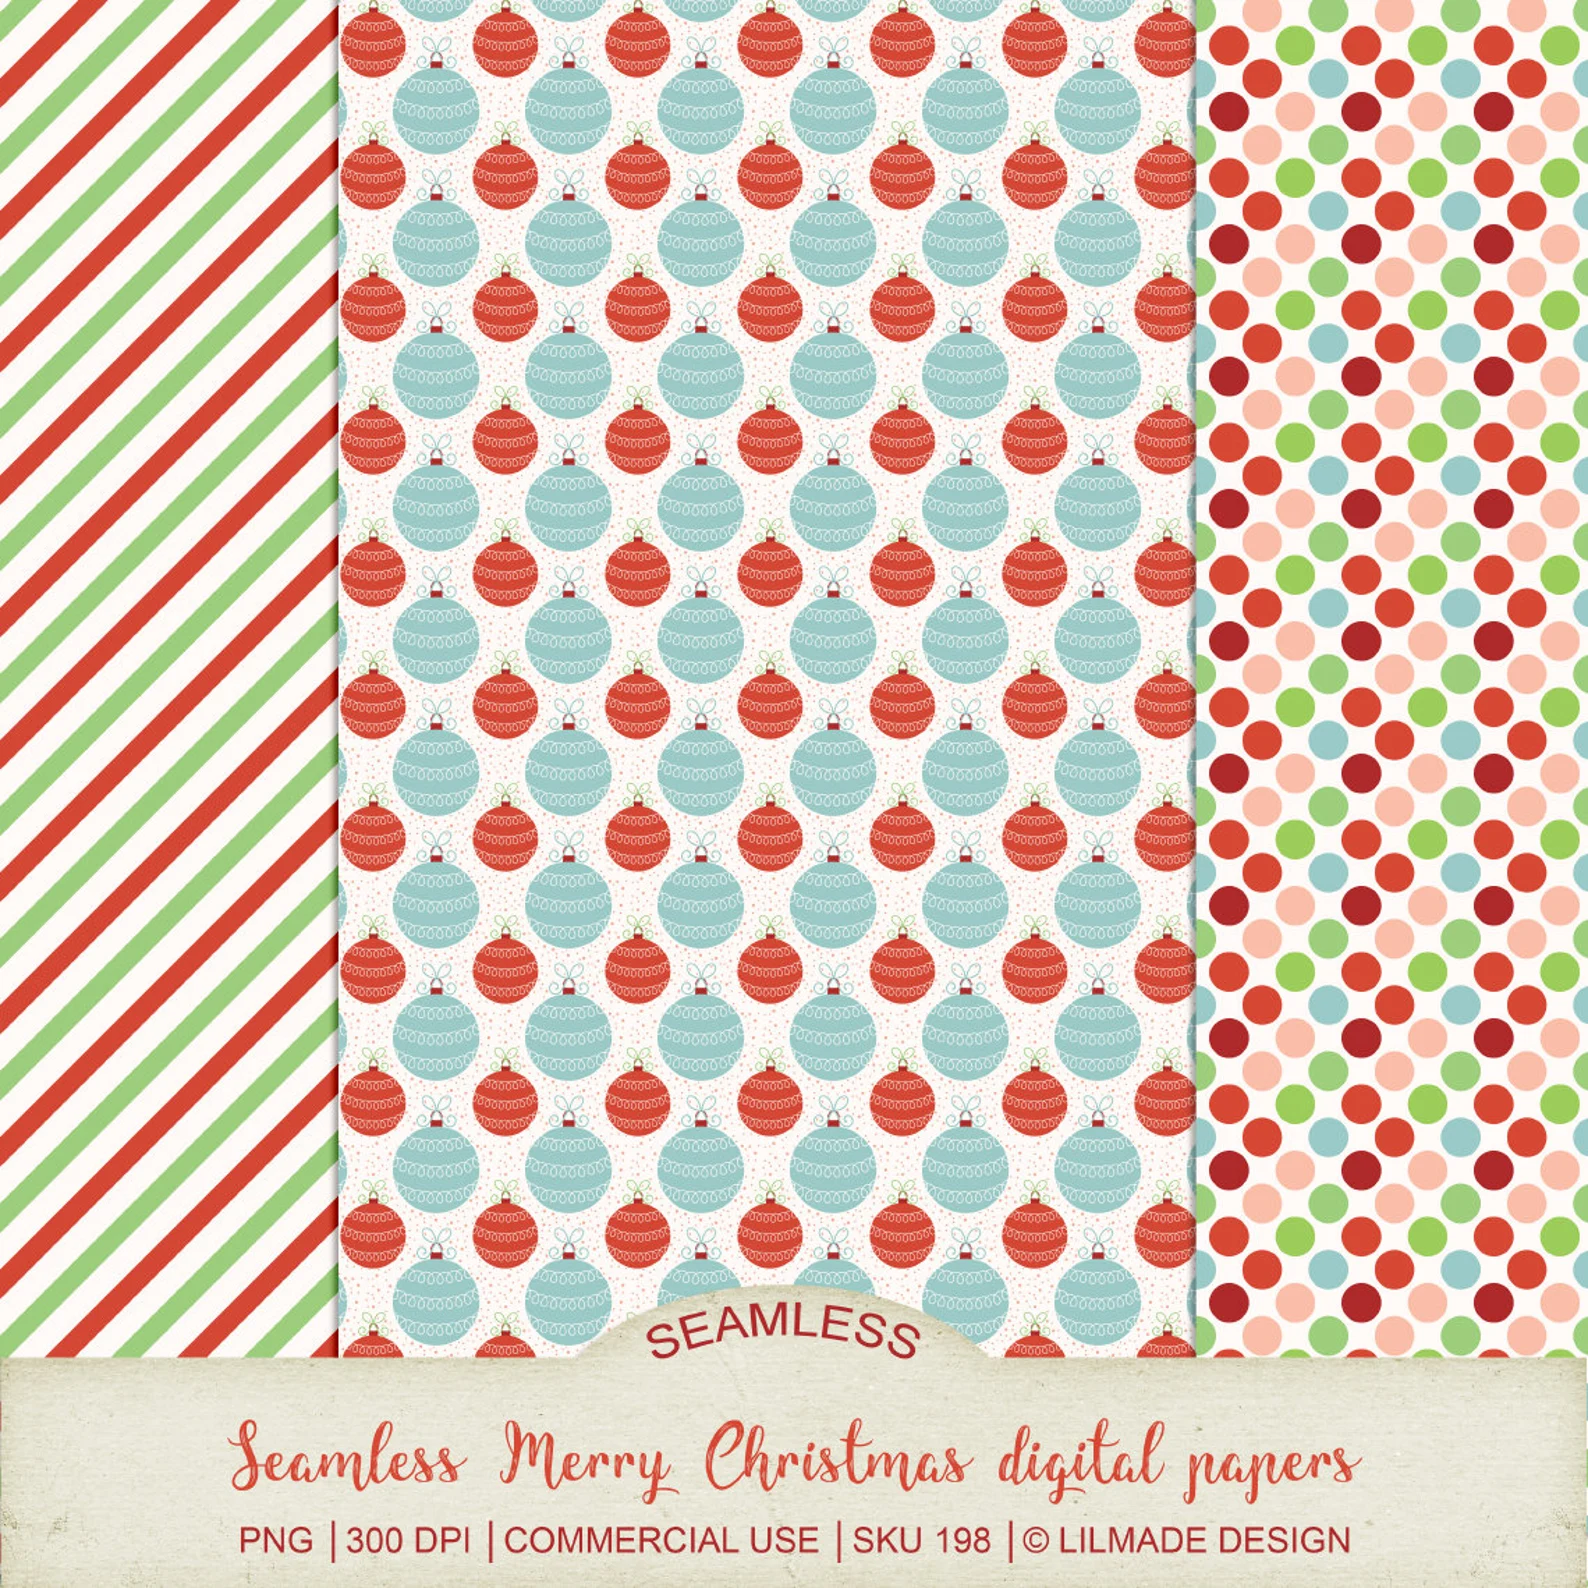 Seamless Christmas digital papers for commercial use, holiday digital papers 